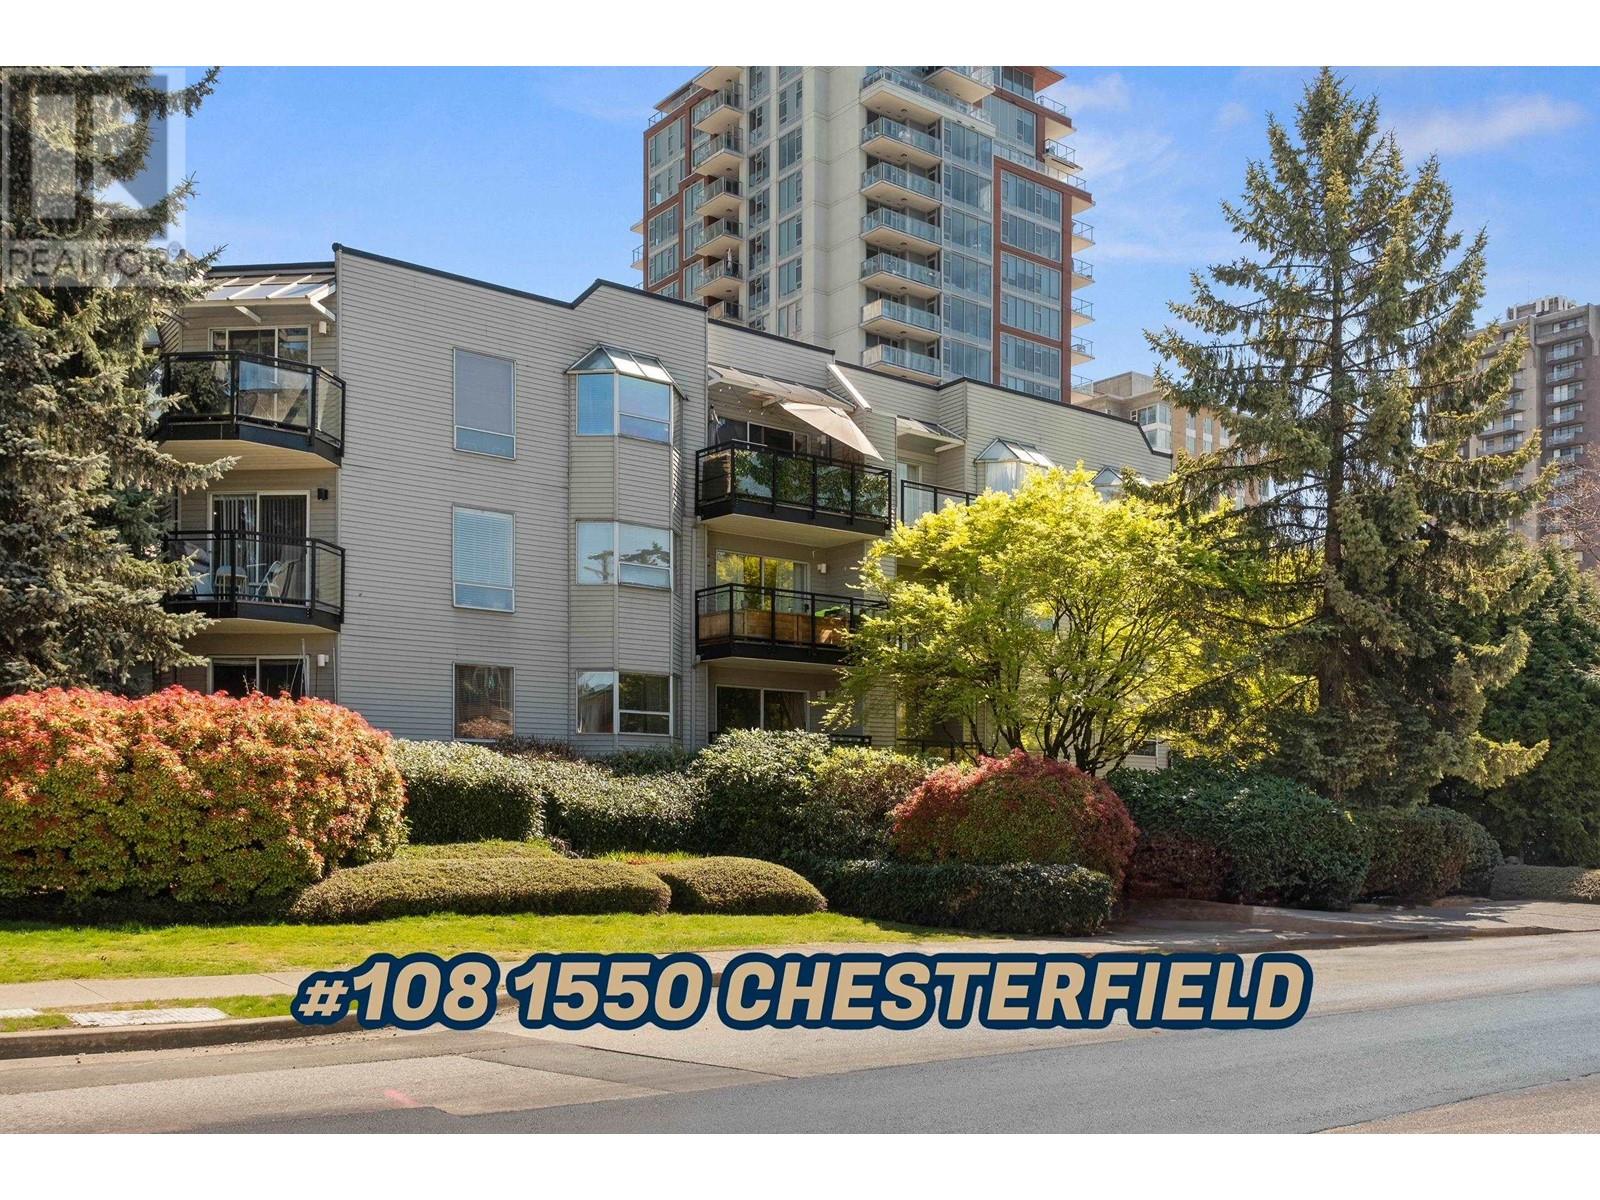 108 1550 CHESTERFIELD AVENUE, north vancouver, British Columbia V7M2N6